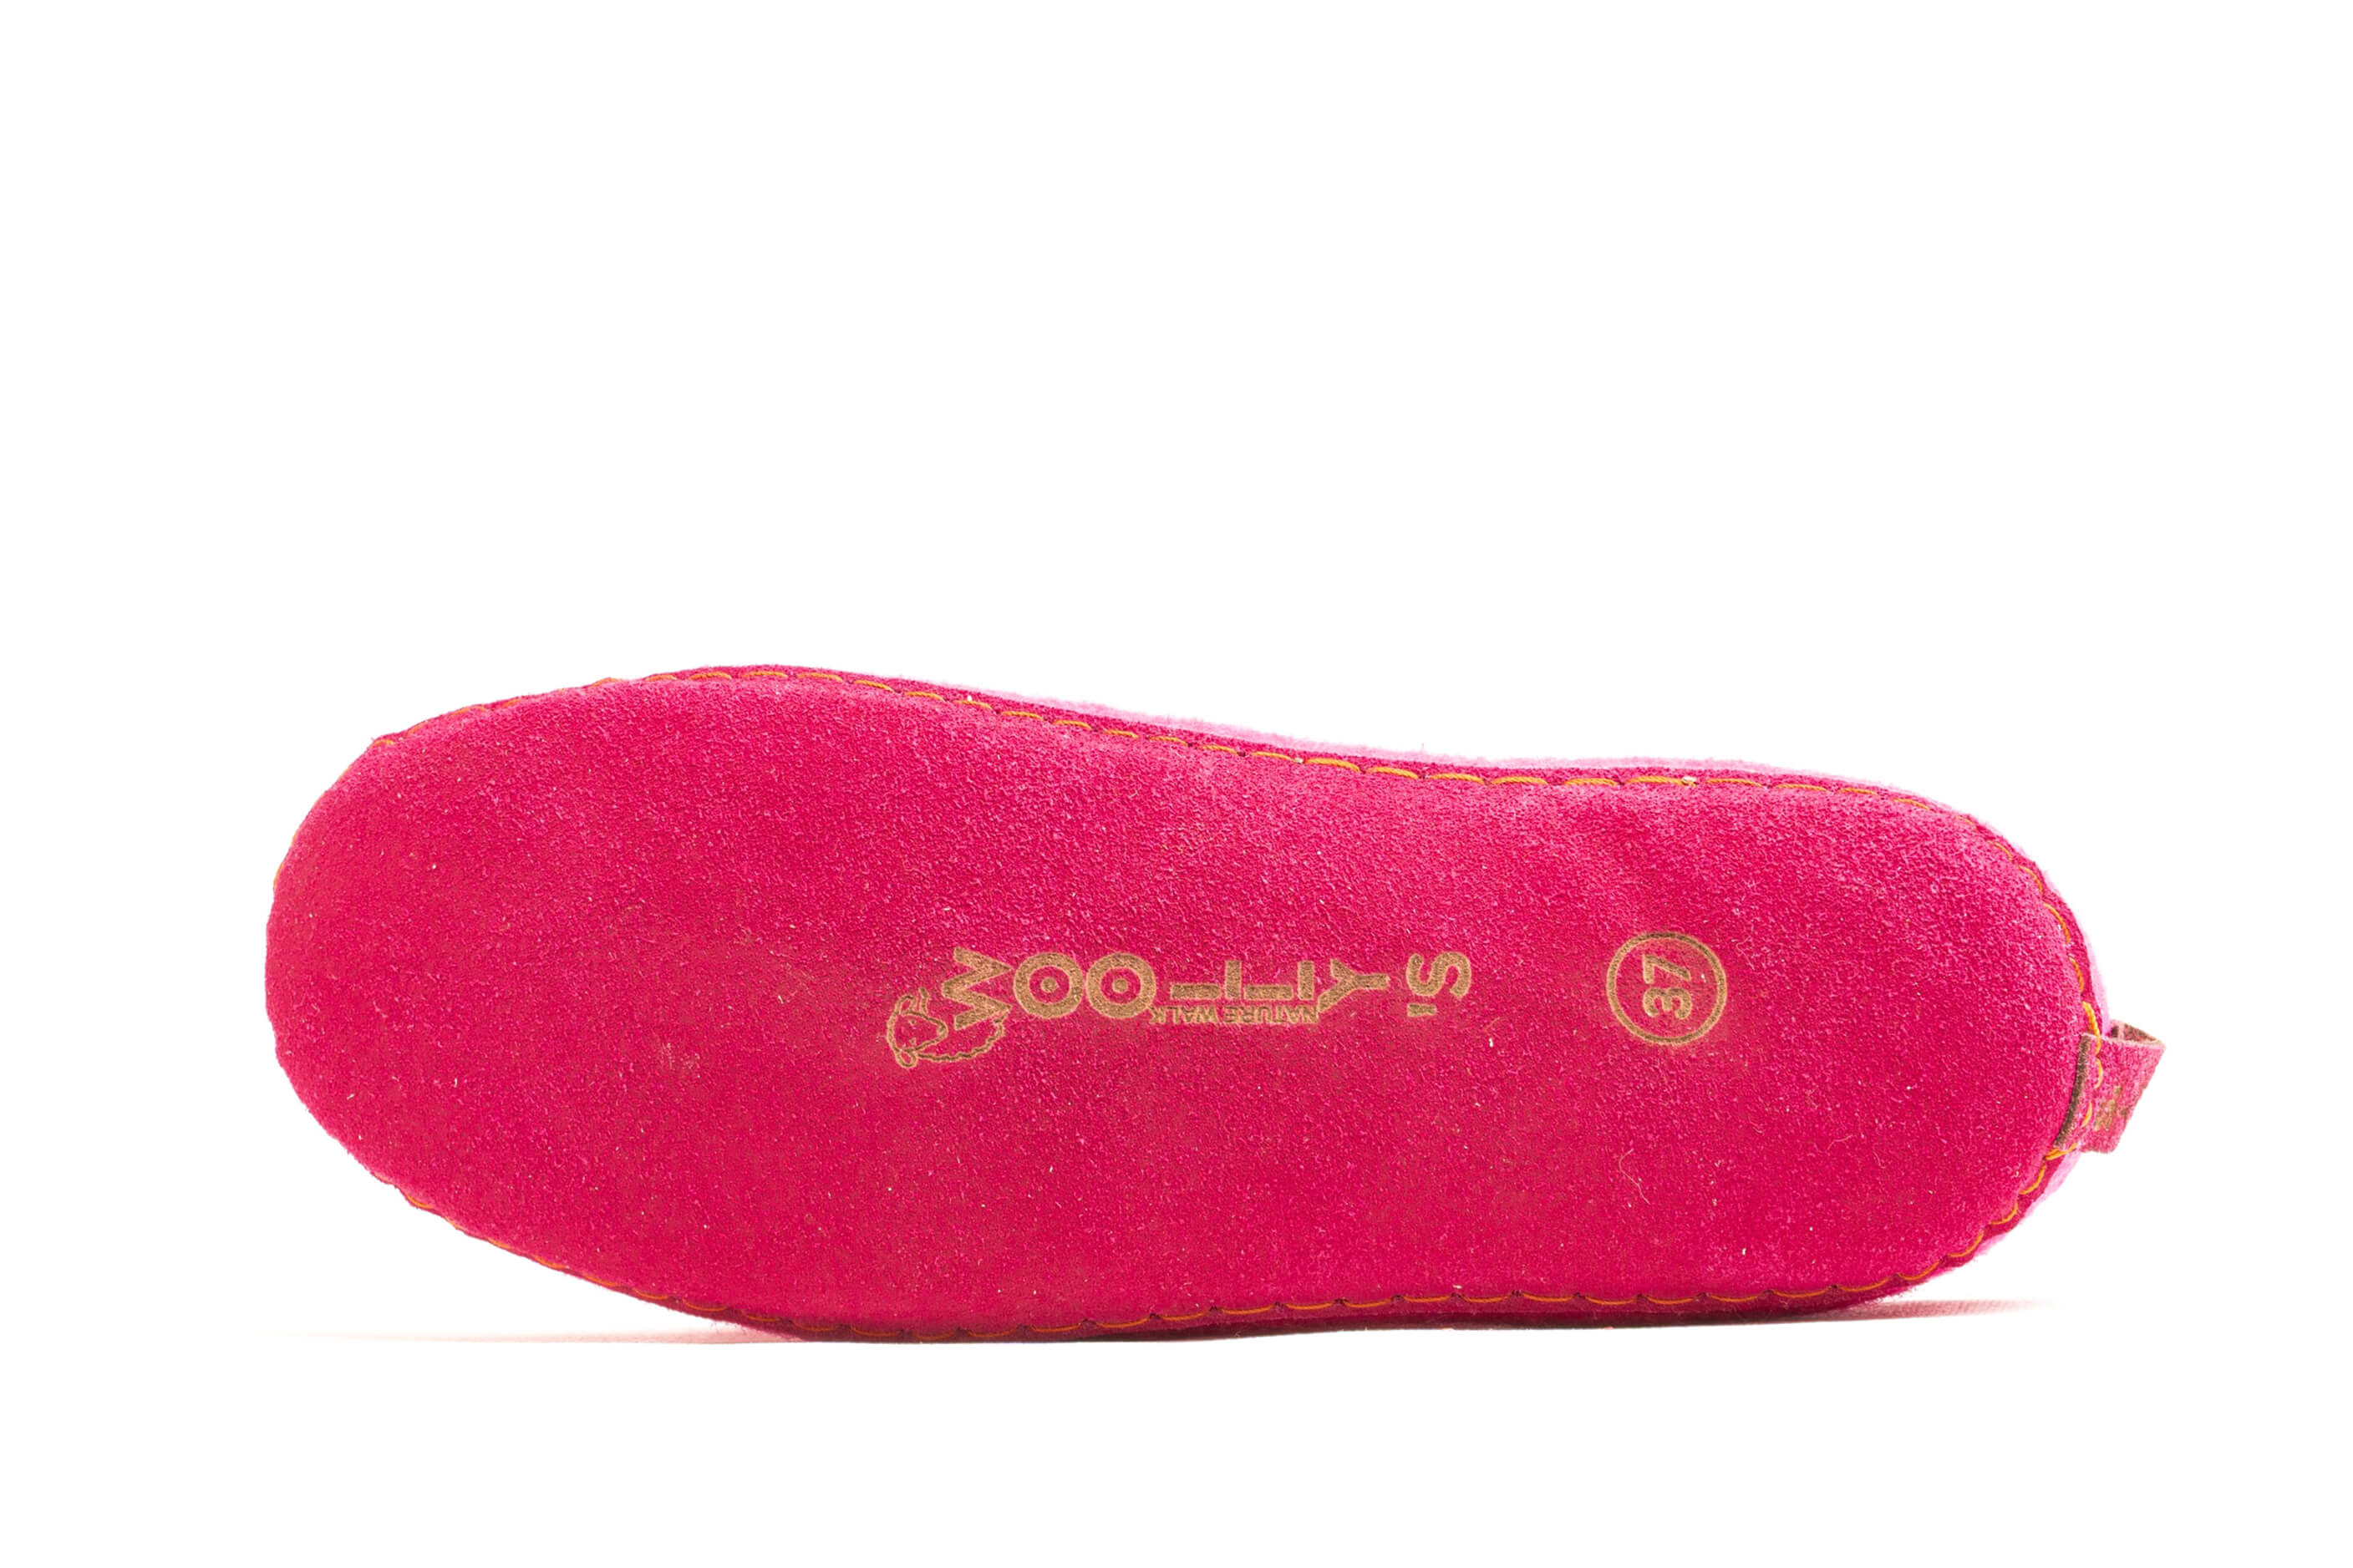 Indoor Open Heel Slippers With Leather Sole - Fuchsia